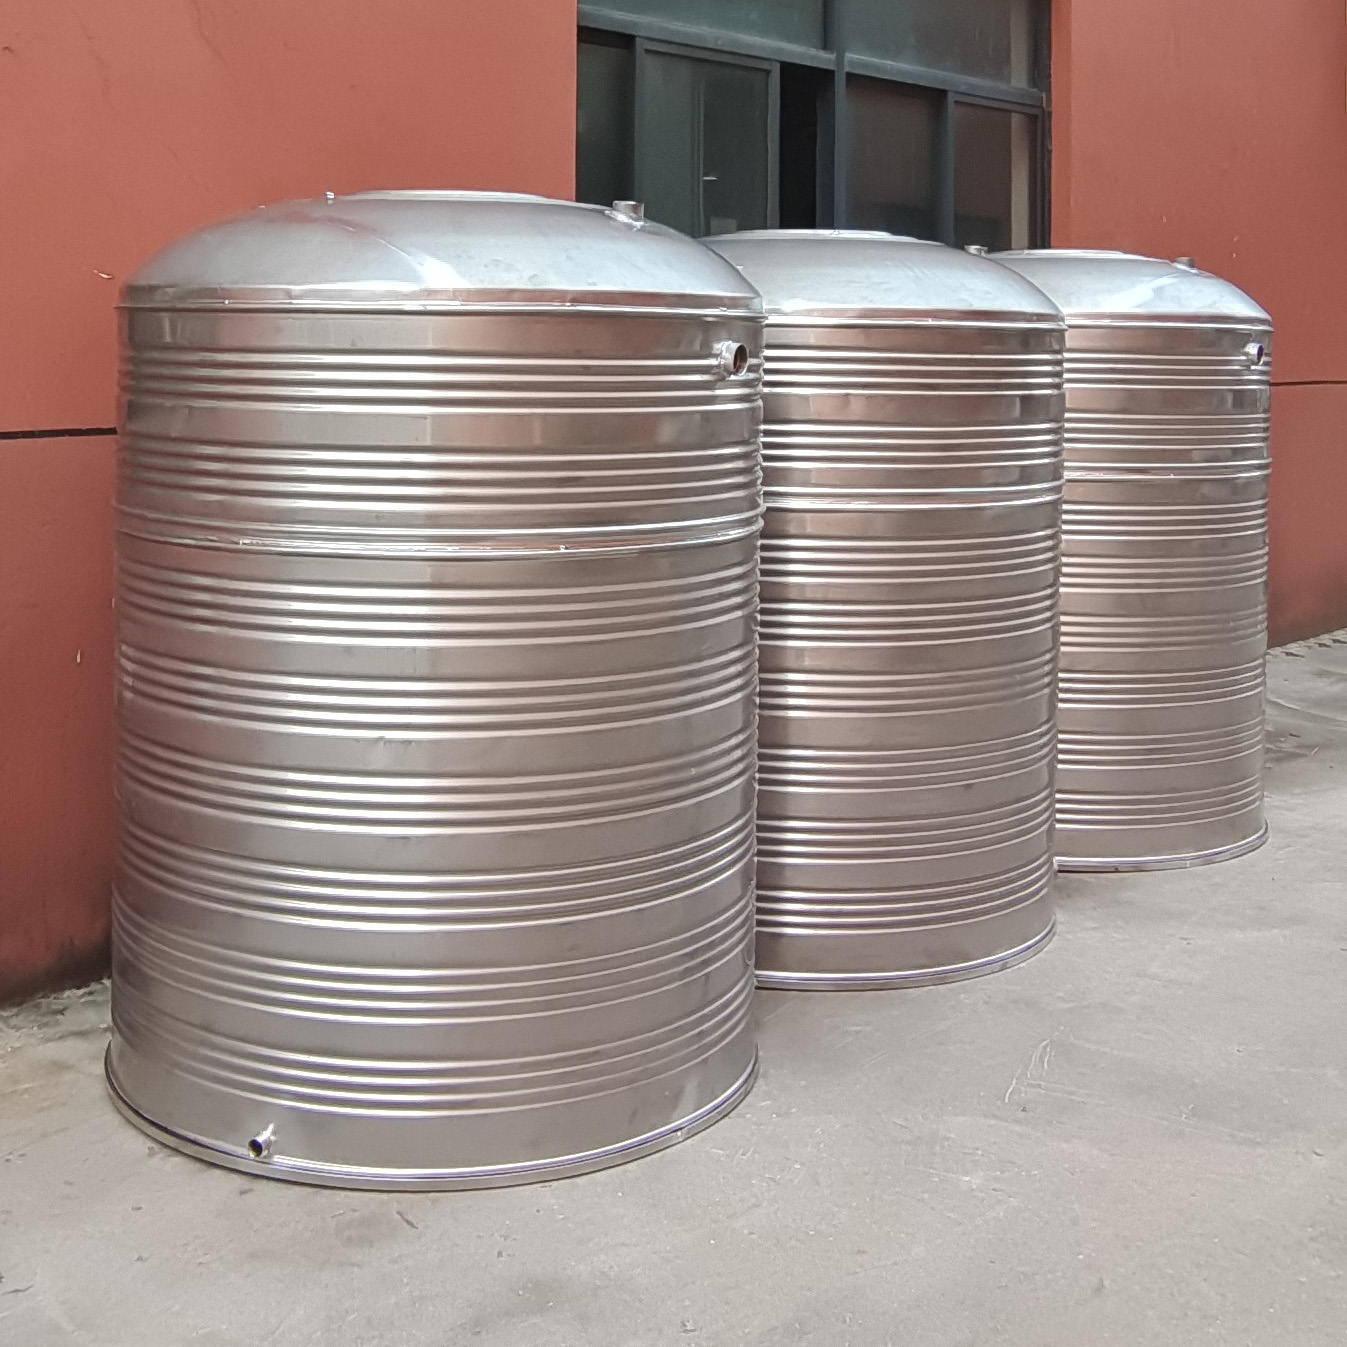 full stainless steel sus 304 hot pre insulated hot water storage tanks